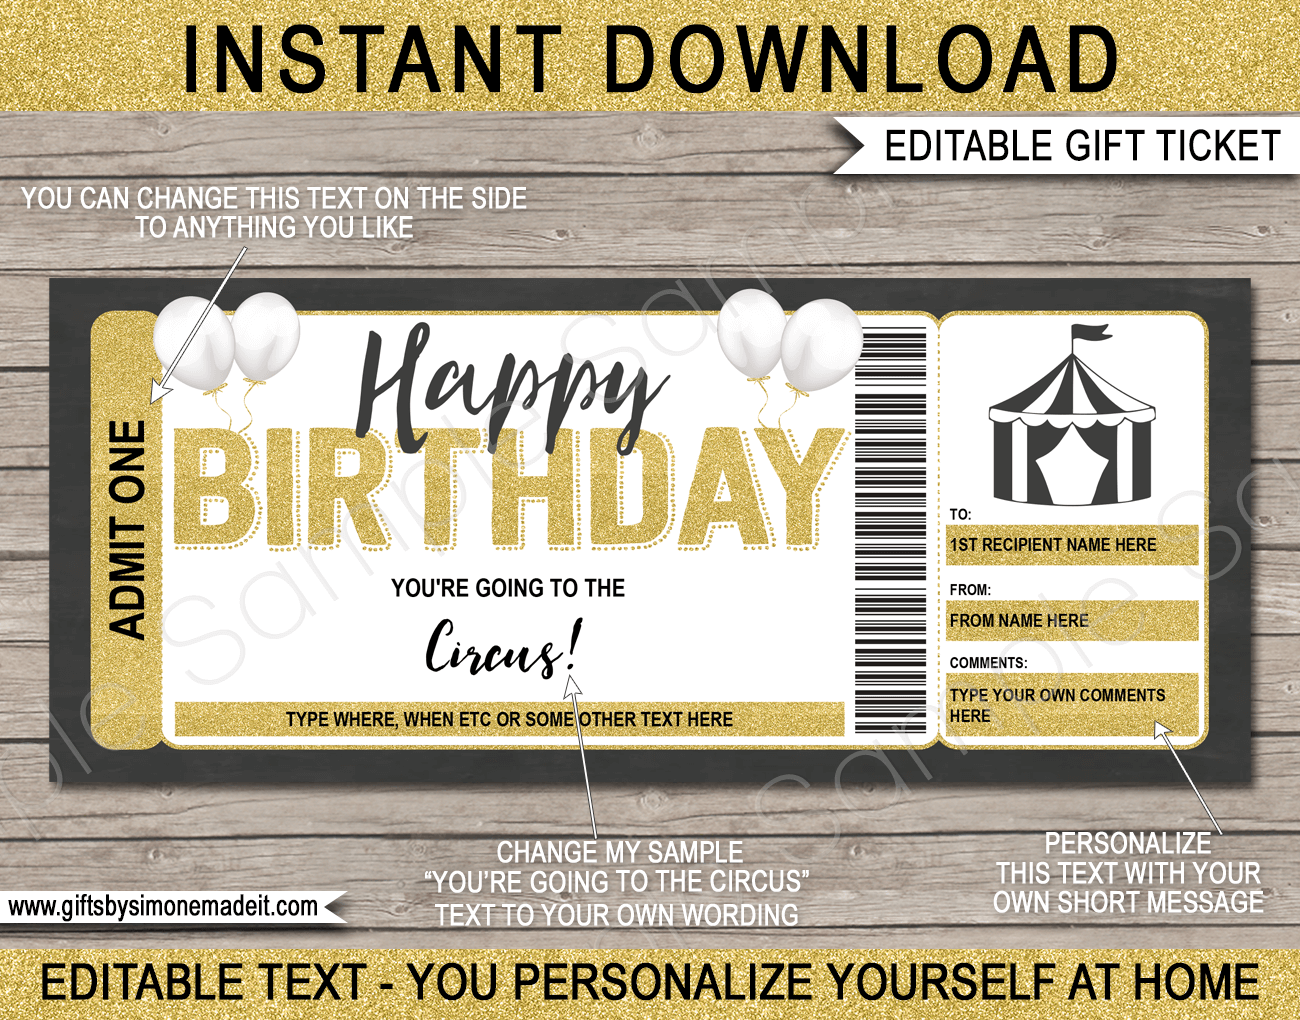 Printable Carnival Ticket Template